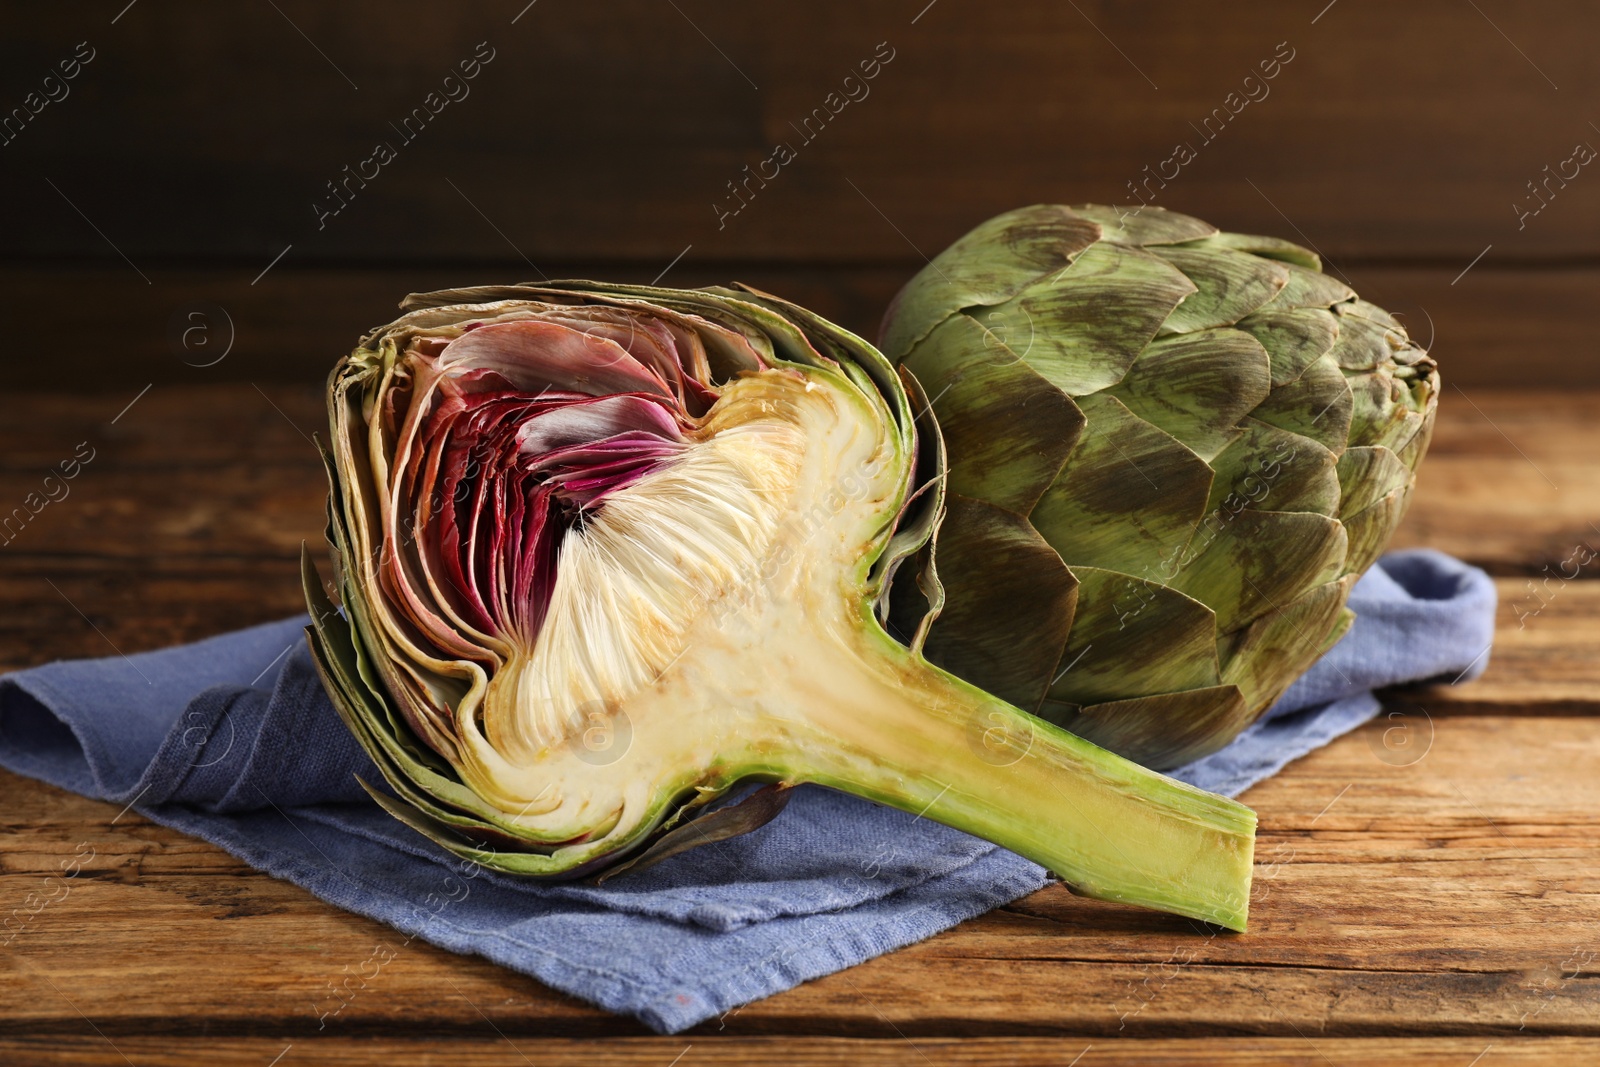 Photo of Cut and whole fresh raw artichokes on wooden table